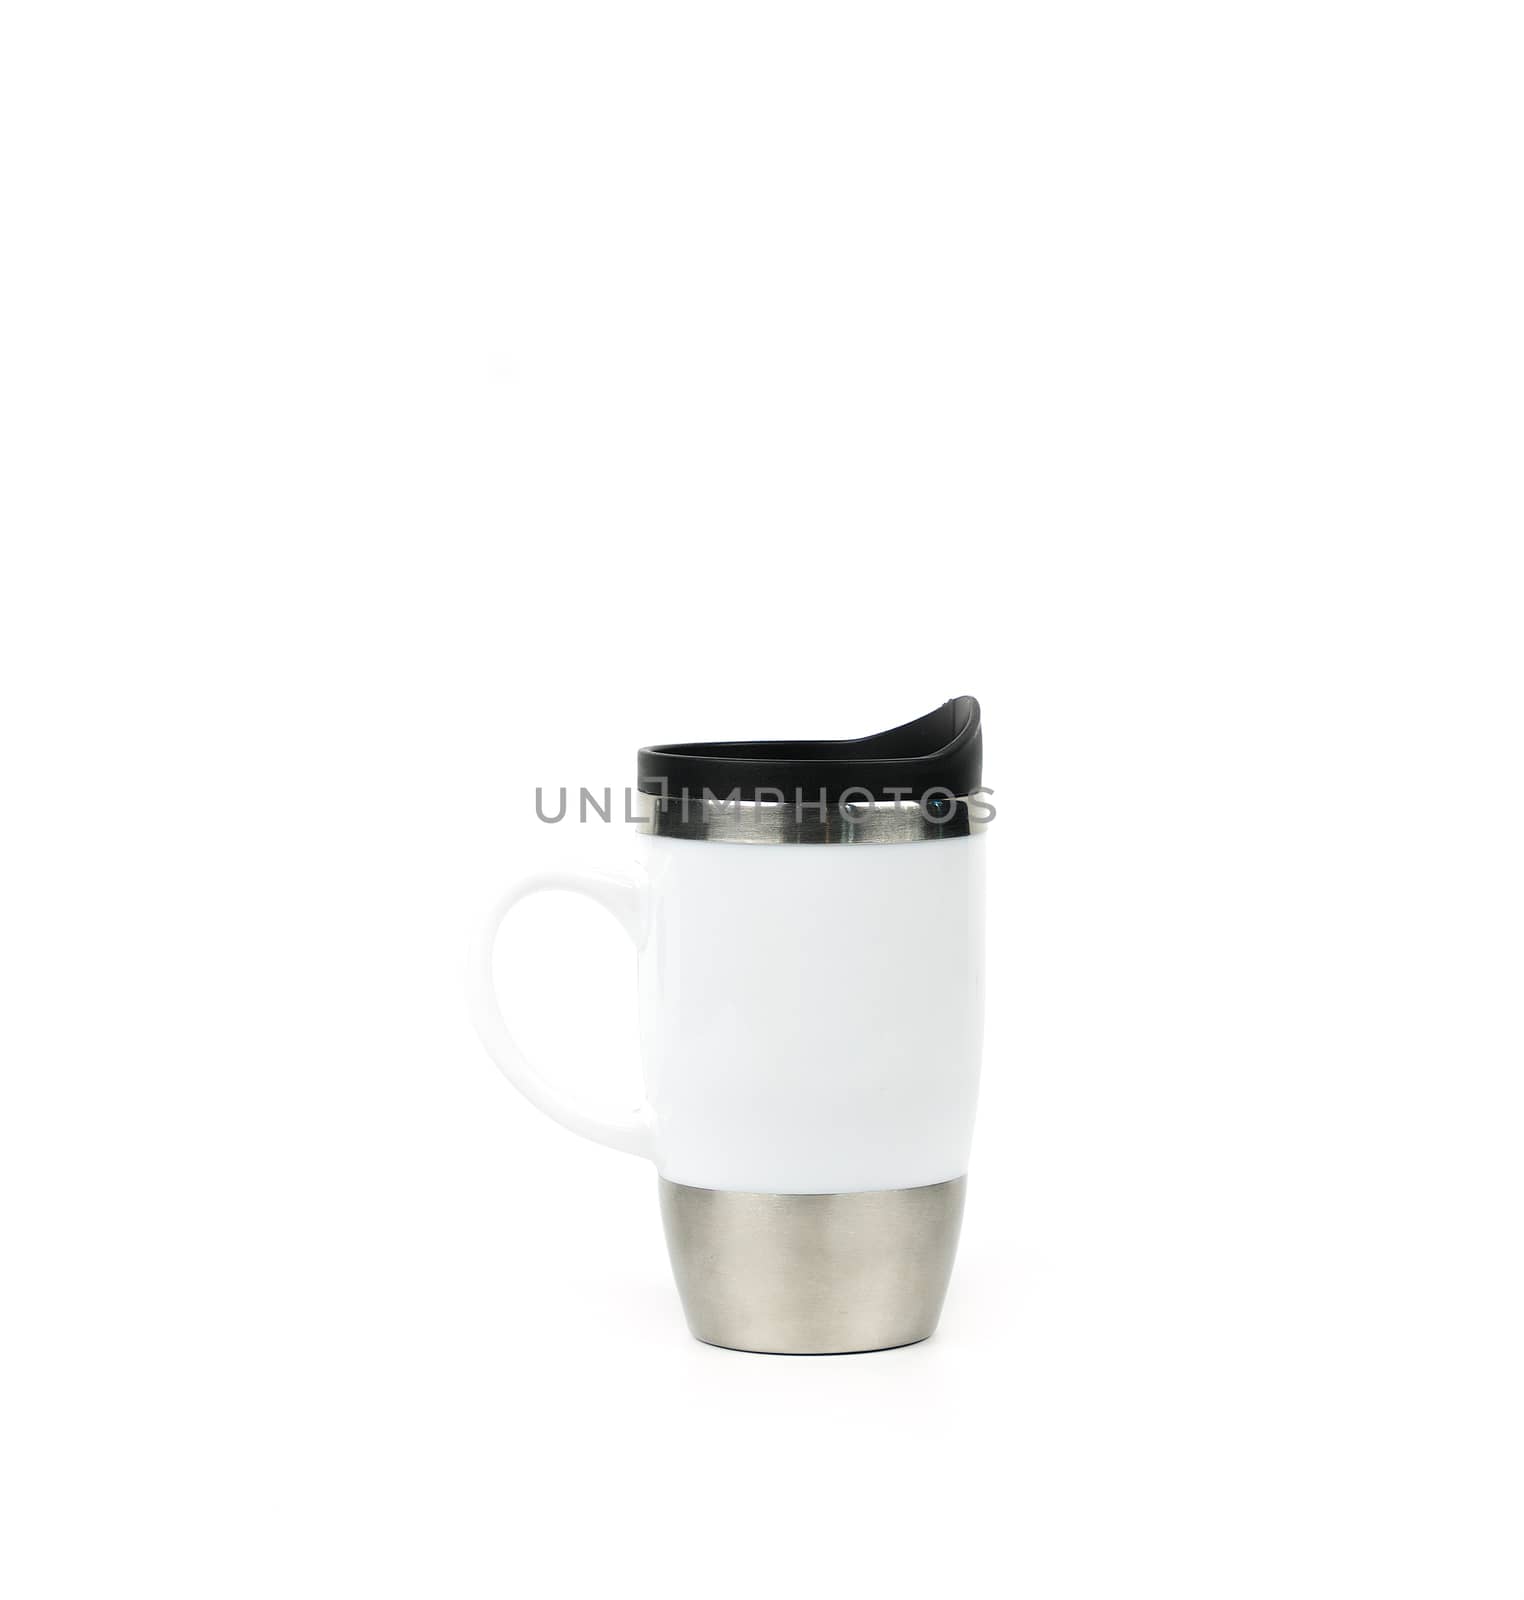 White thermos stainless steel ceramic glass with handle isolated on white background with copy space by Fahroni